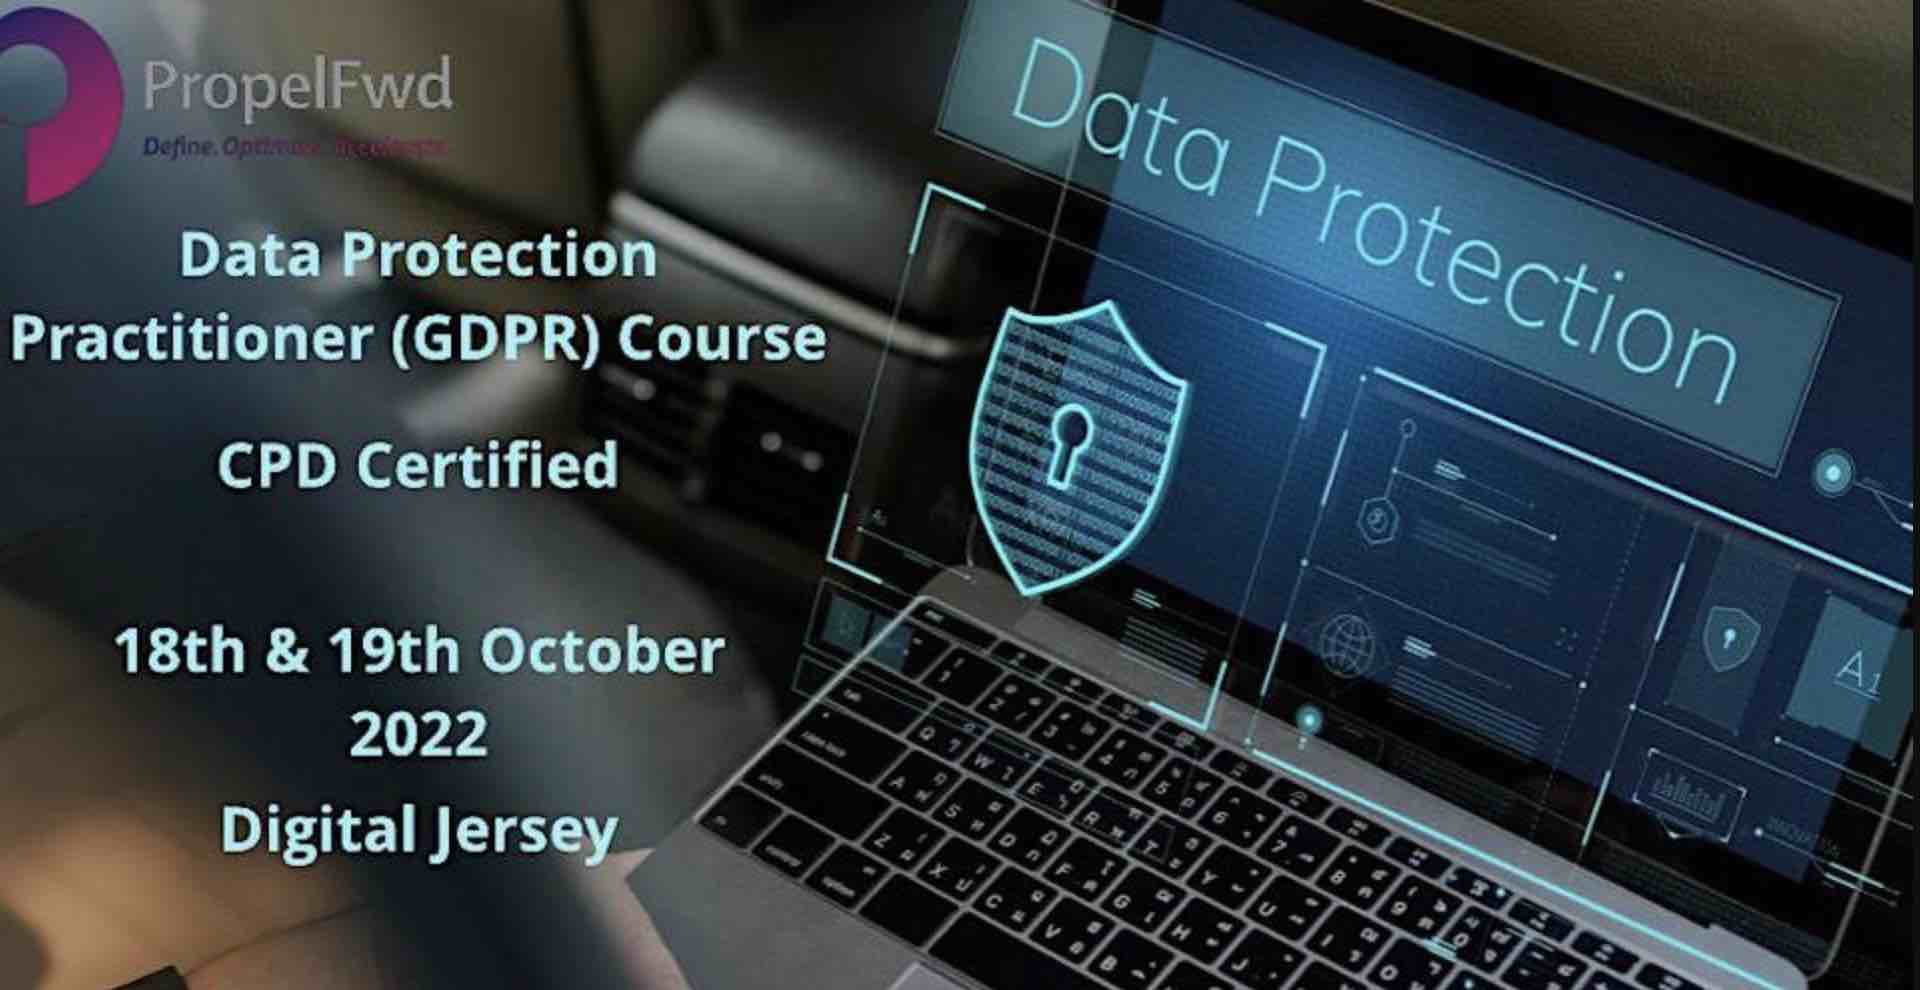 Propelfwd – Data Protection foundation (GDPR) course